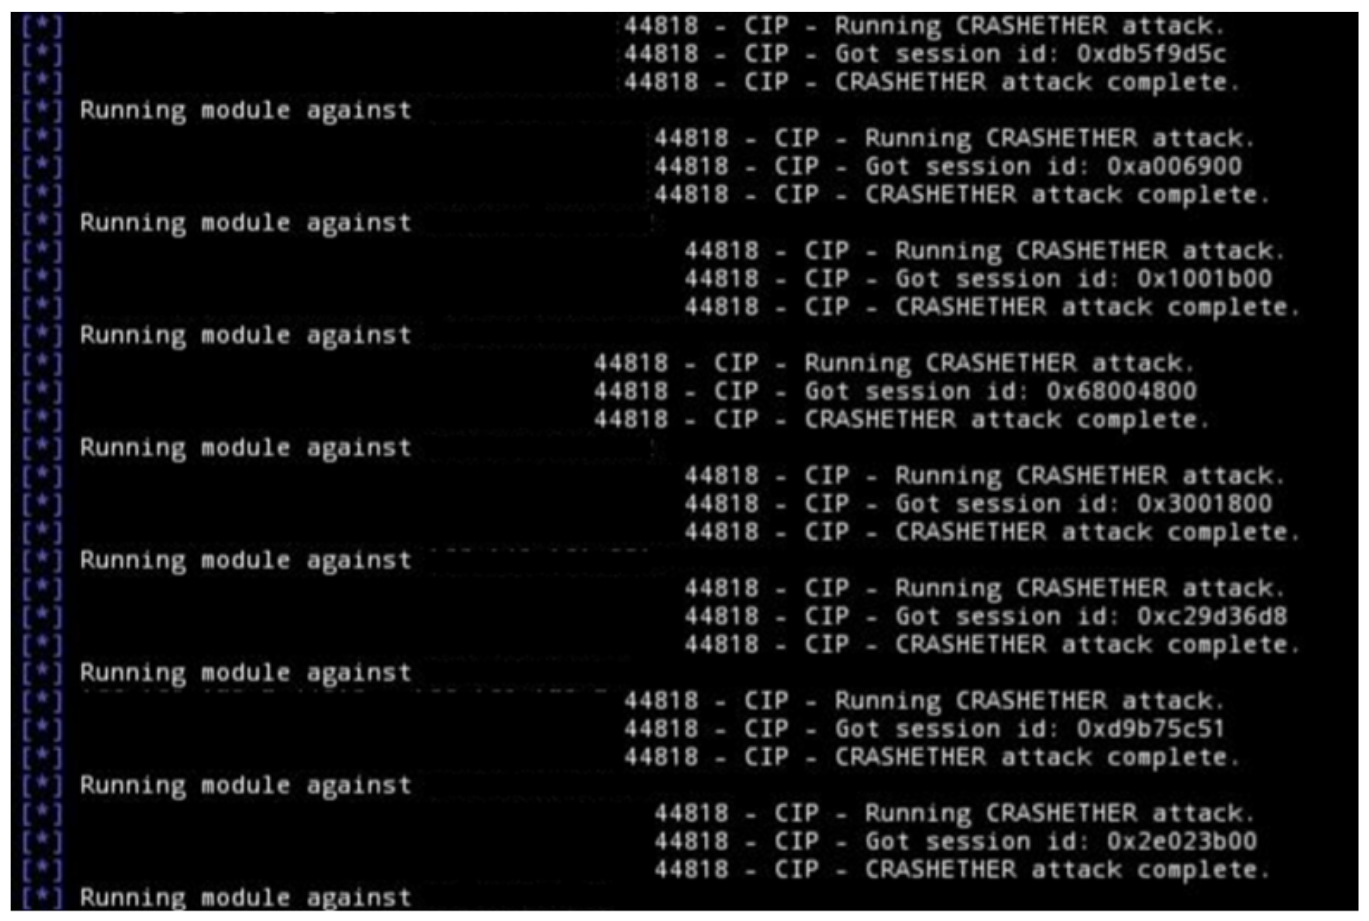 EtherNet/IP CIP Metasploit module commands executed by hacktivists